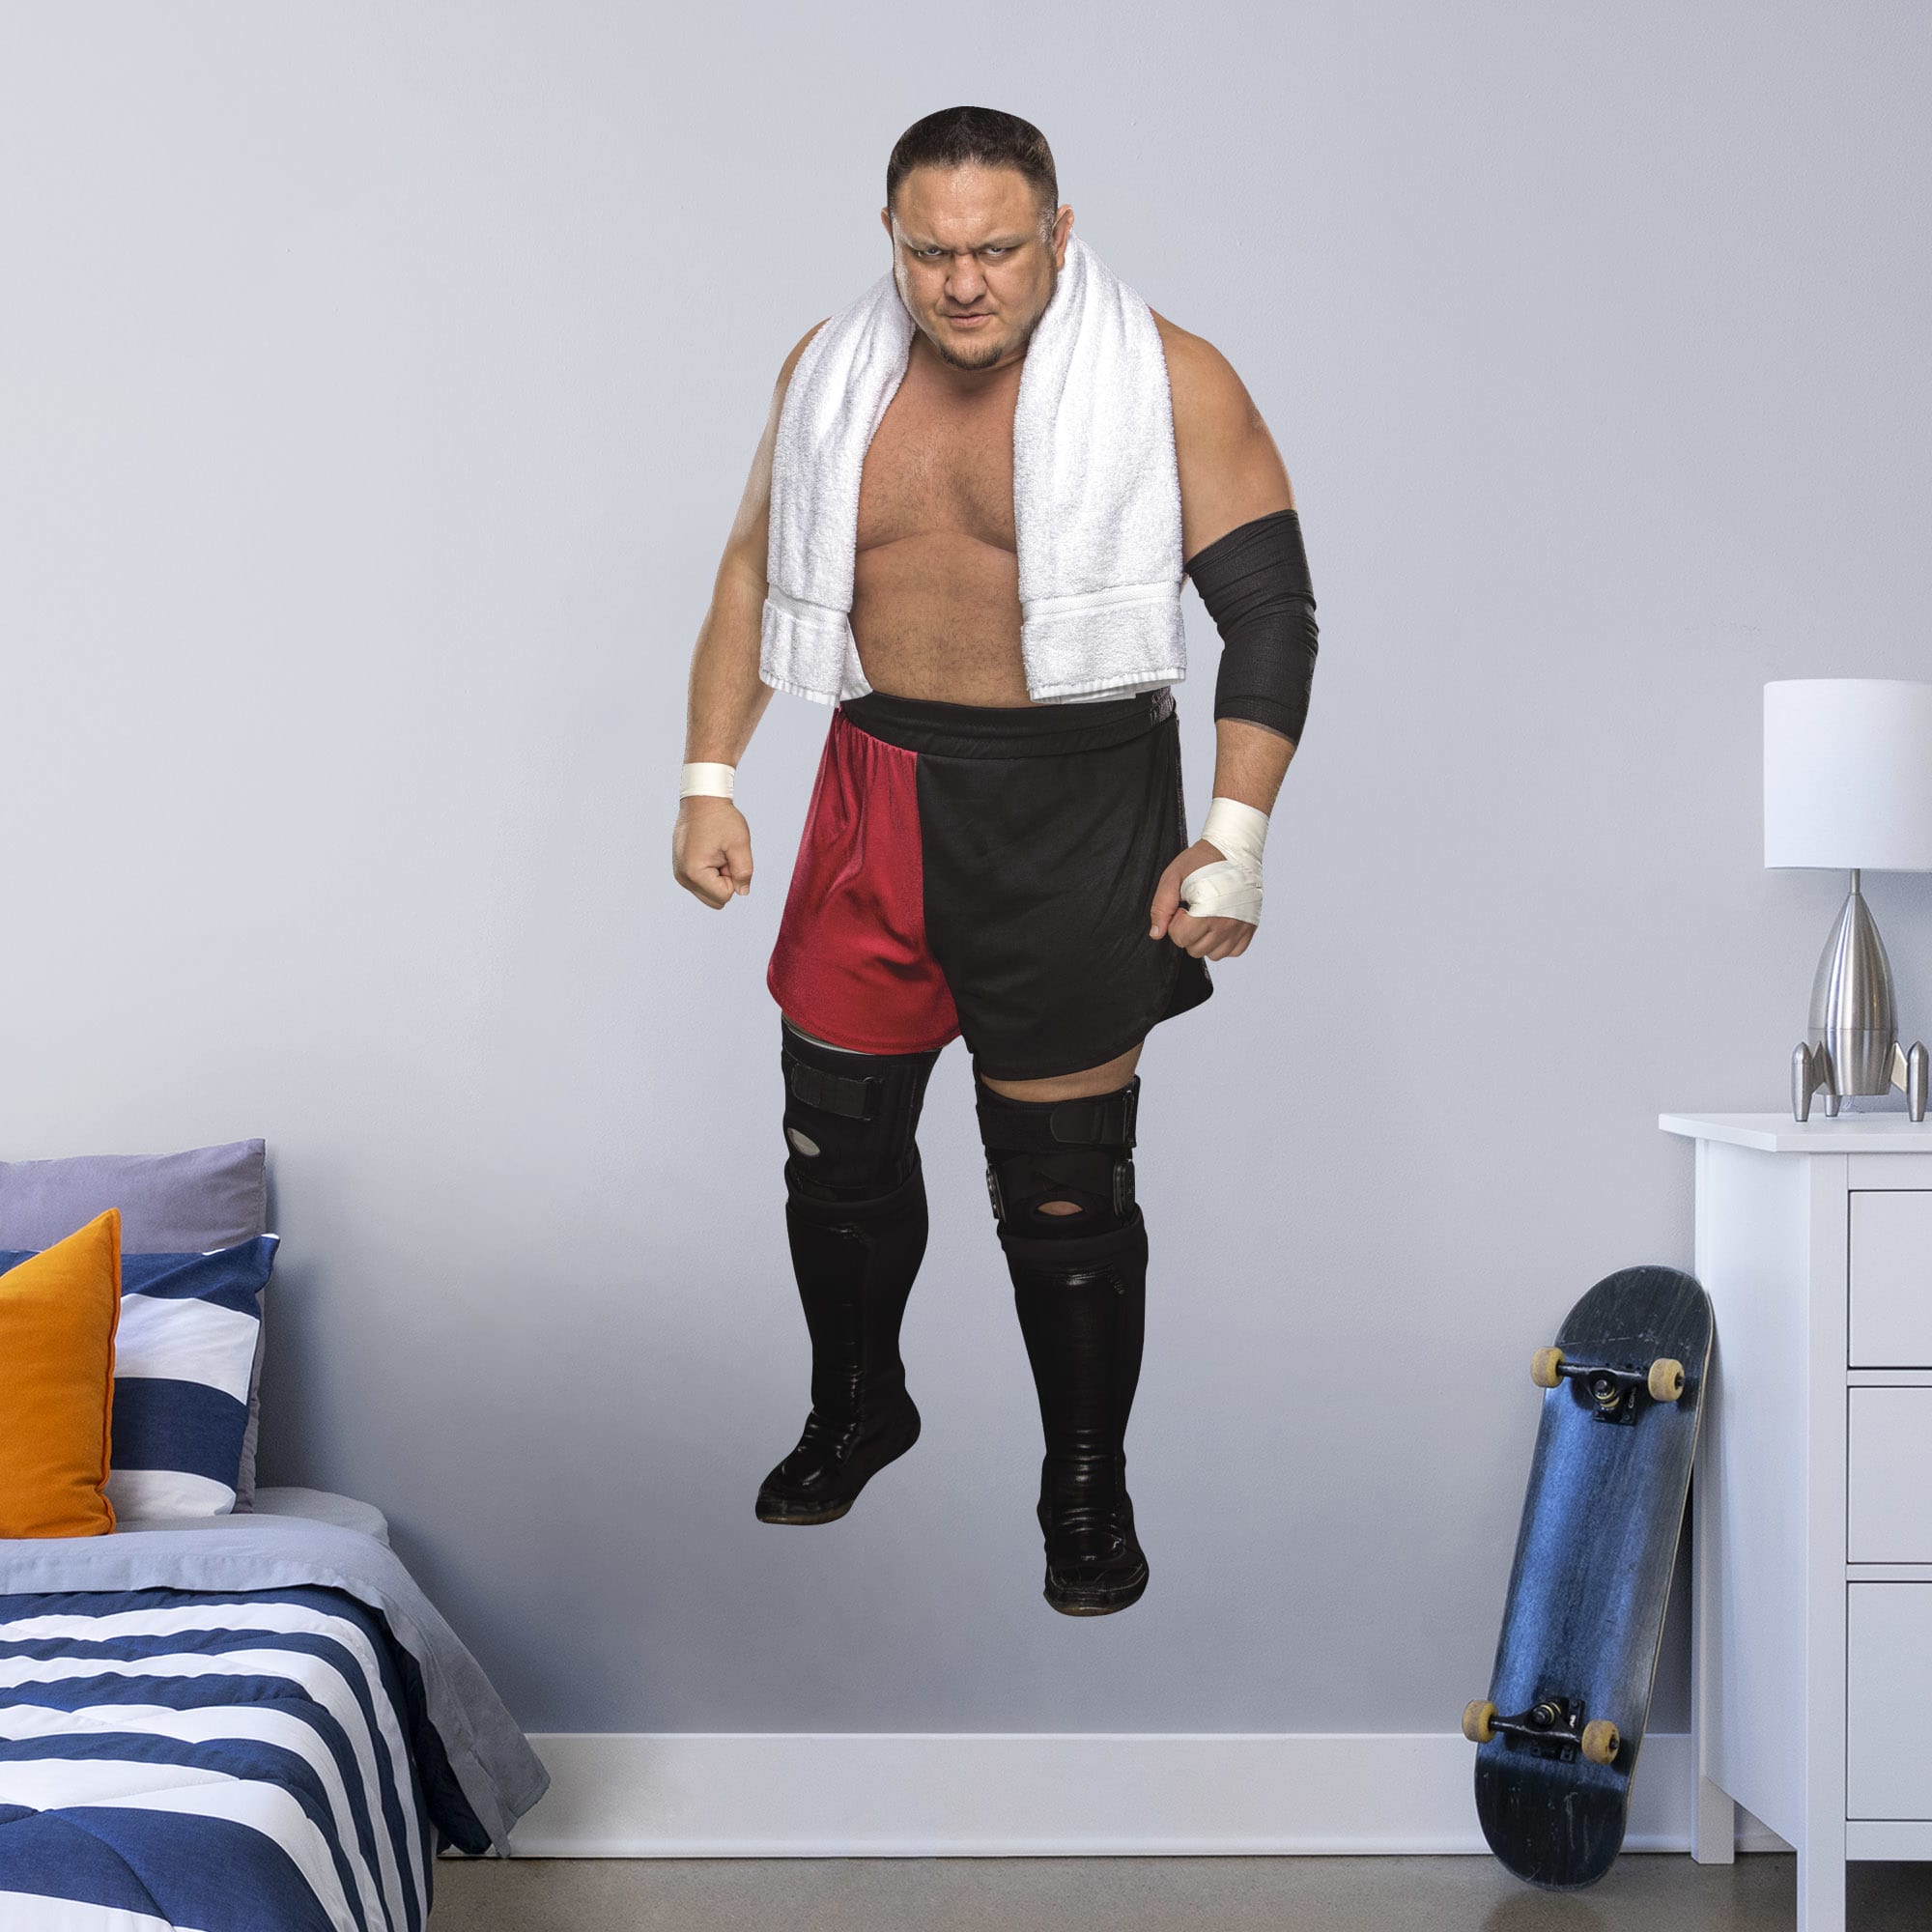 Samoa Joe for WWE - Officially Licensed Removable Wall Decal Life-Size Superstar + 2 Decals (33"W x 77"H) by Fathead | Vinyl